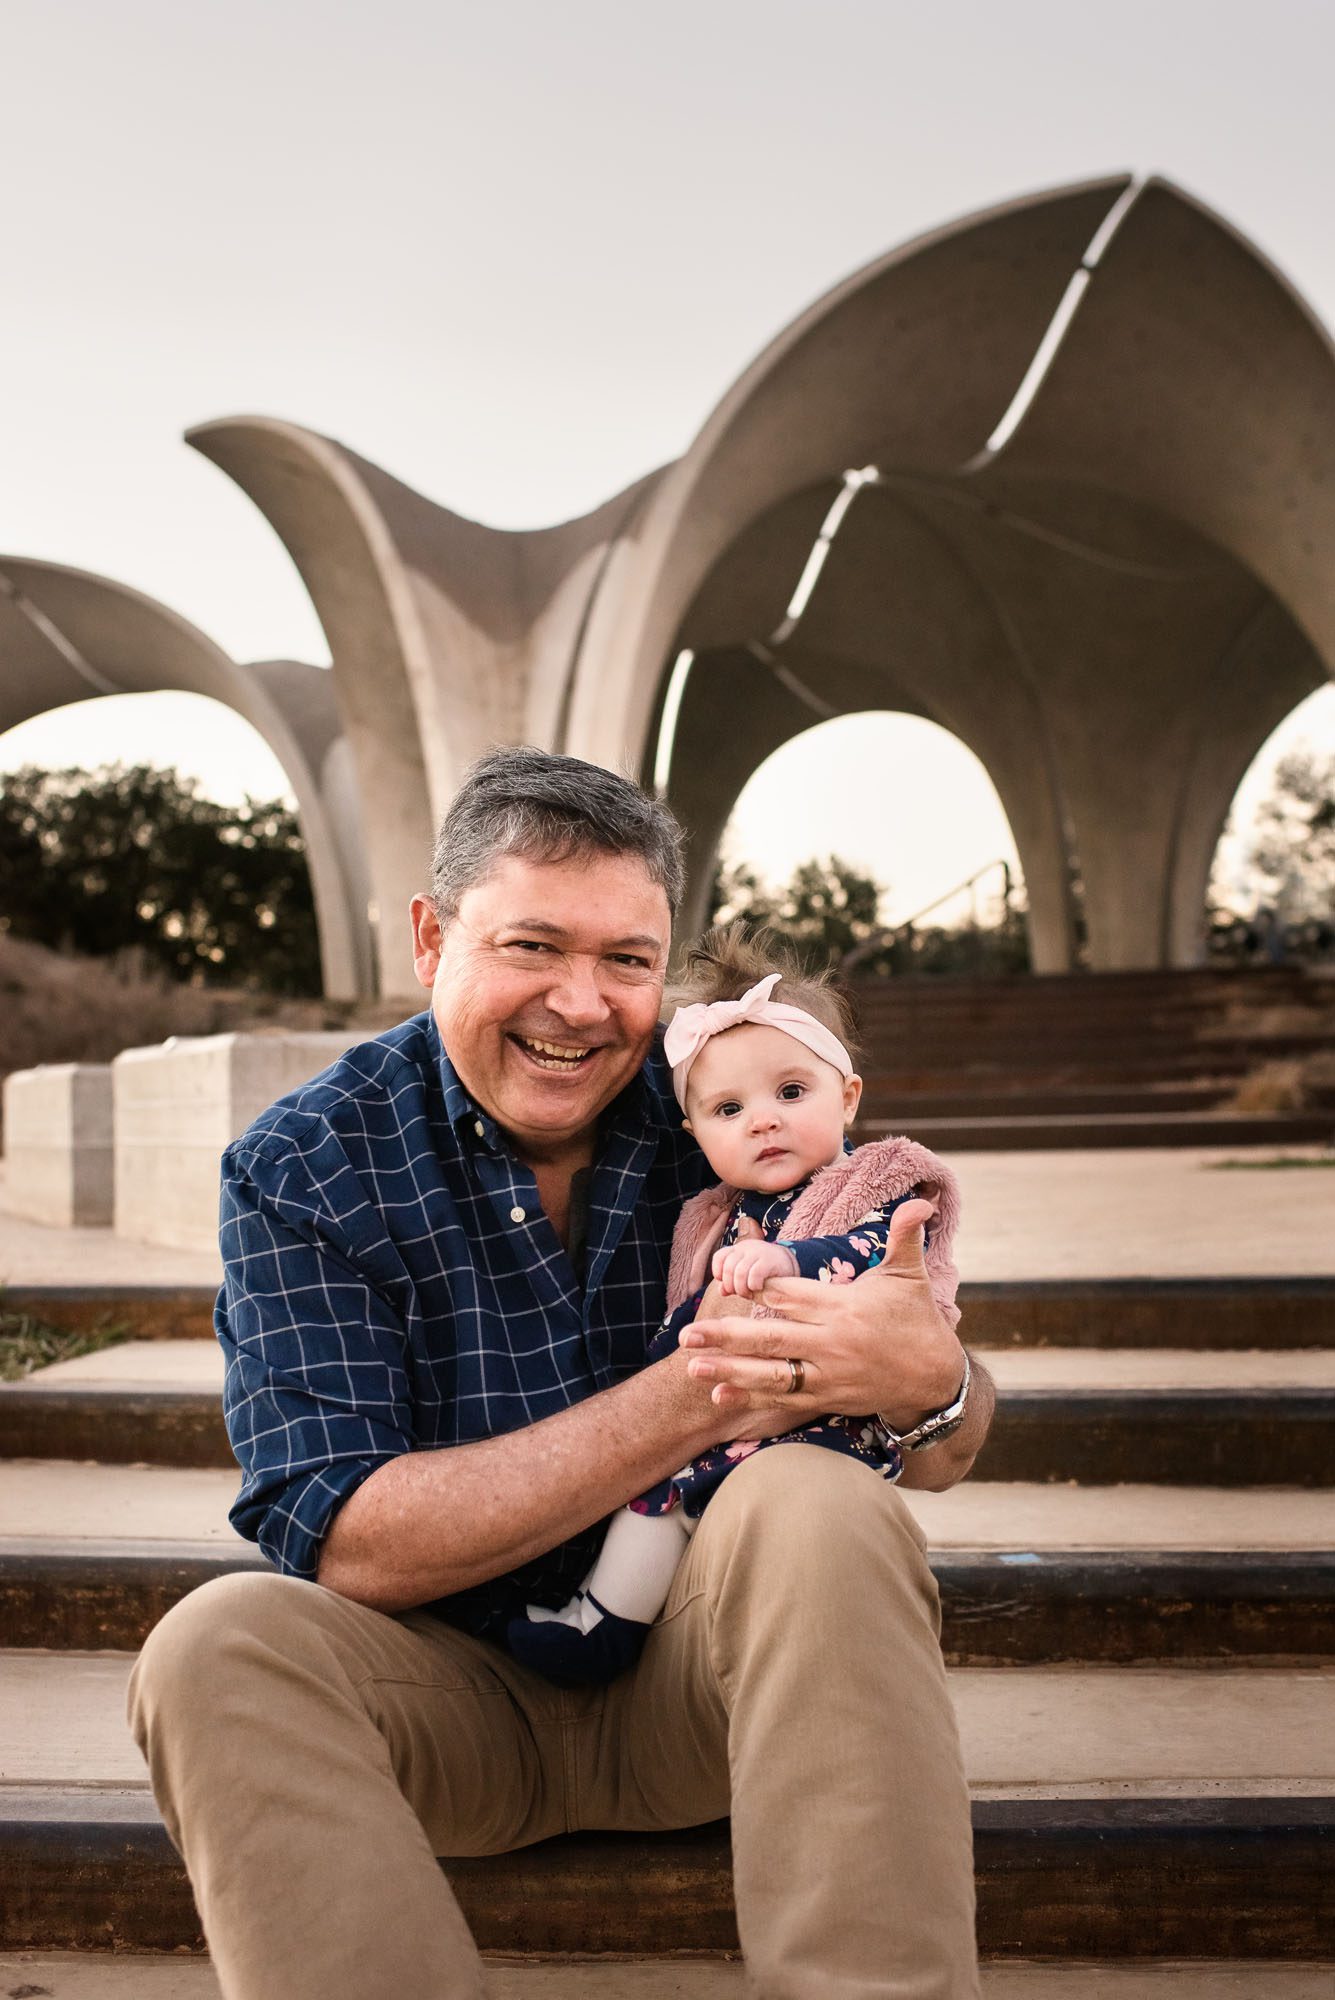 Gradfather sitting with granddaughter in front of sculptural arch, San Antonio Family Photographer